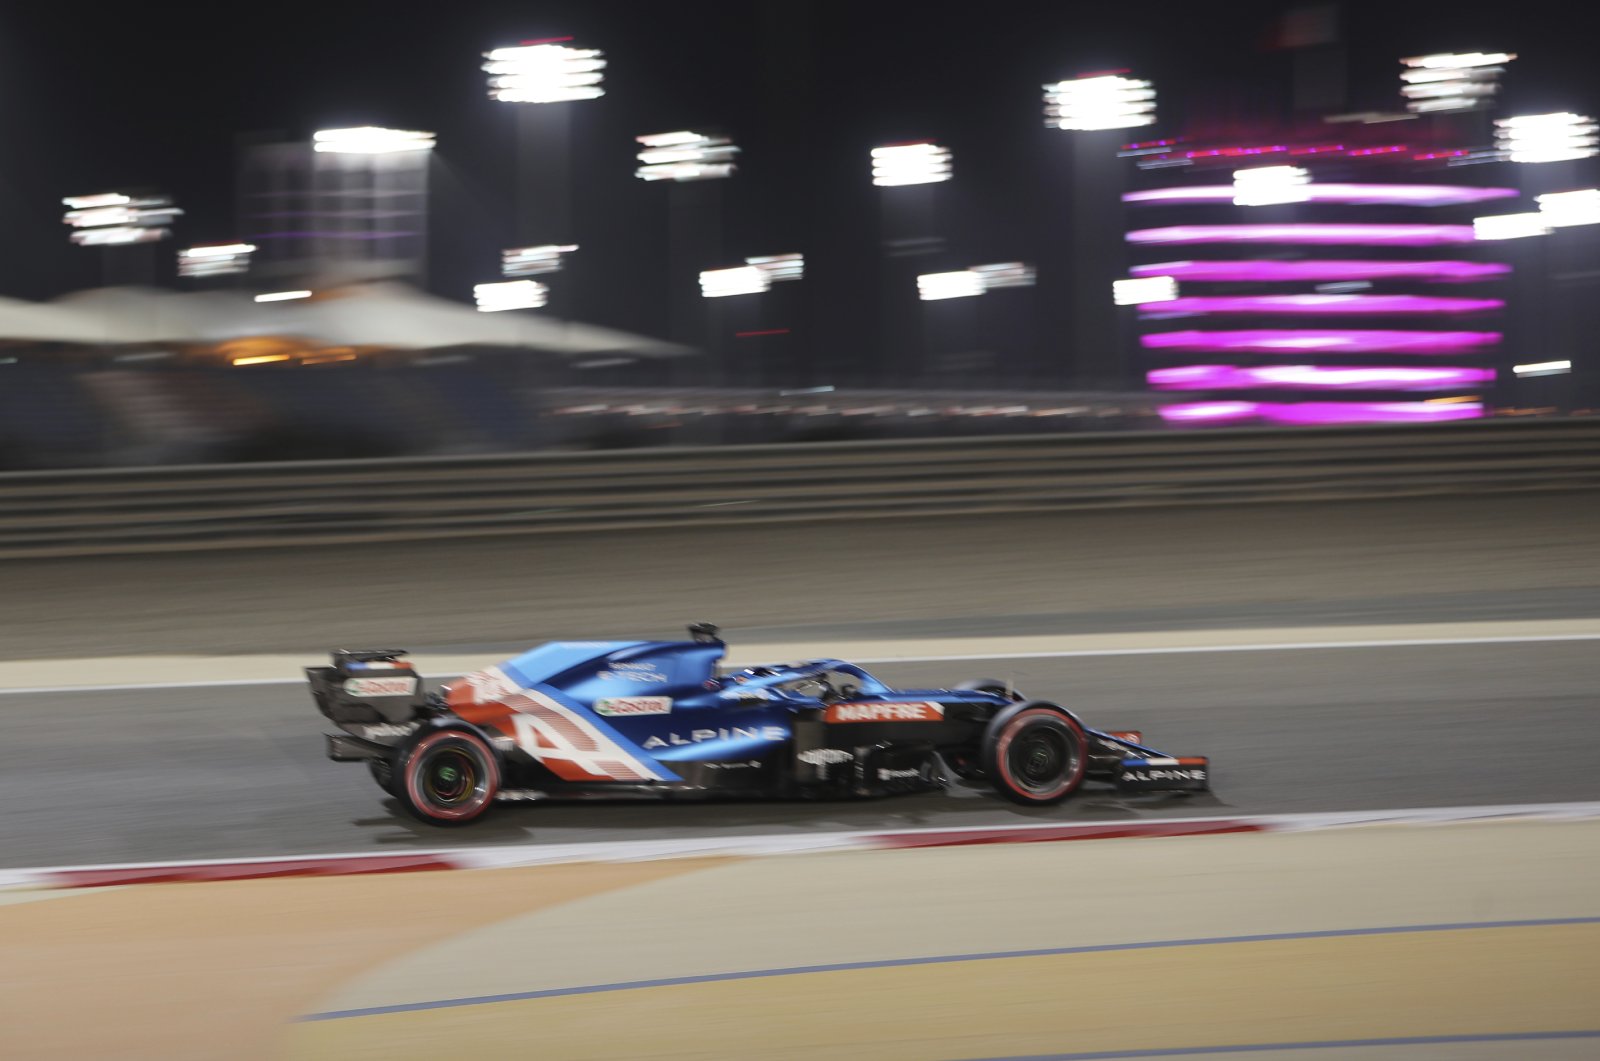 Alpine driver Fernando Alonso of Spain steers his car during the qualifying session for the Bahrain Formula One Grand Prix, at the Bahrain International Circuit in Sakhir, Bahrain, March 27, 2021. (AP Photo)